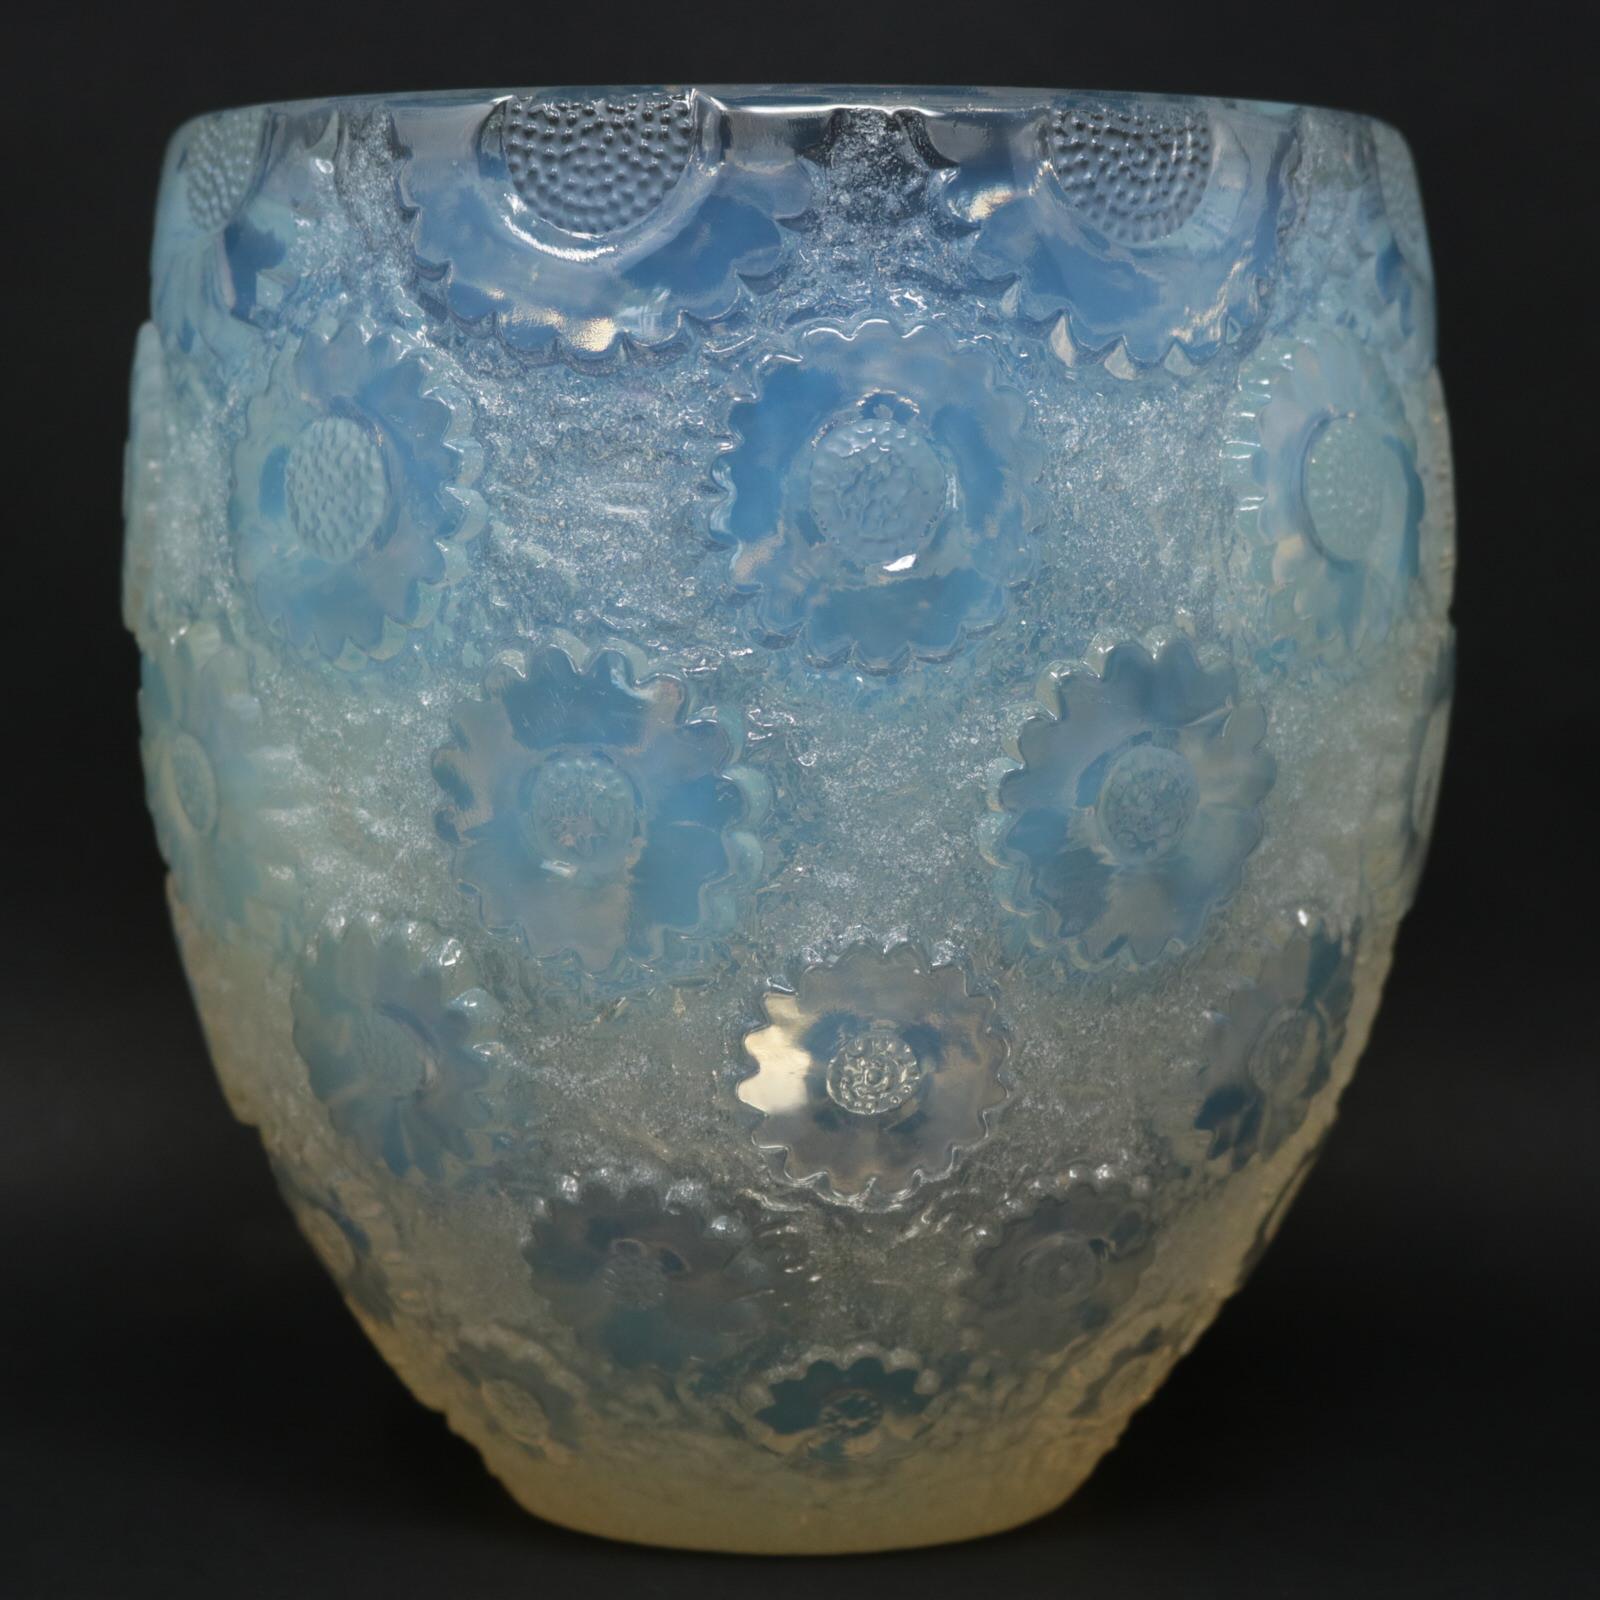 René Lalique opalescent glass 'Paquerettes' vase. This pattern features daisies in relief around the outside. Stenciled makers mark, 'R LALIQUE FRANCE' to the underside. Book reference: Marcilhac 10-877.